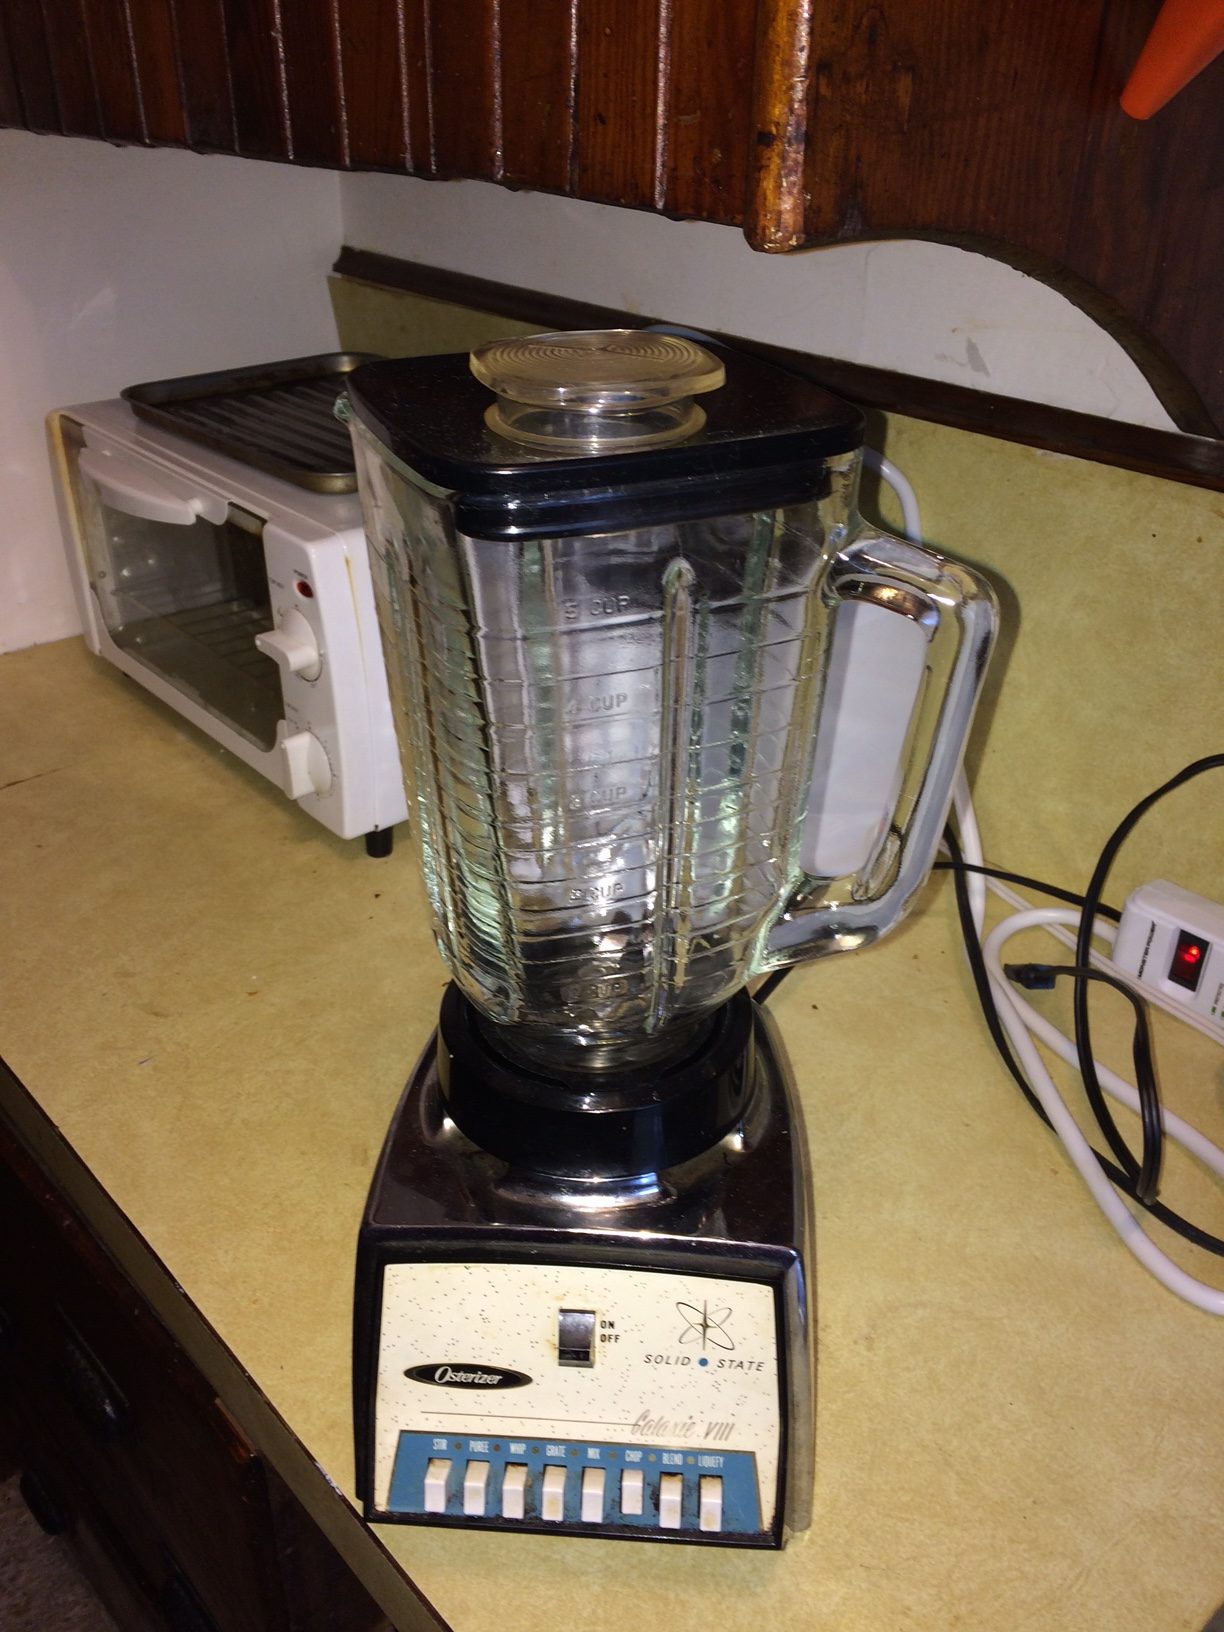 Another vintage blender with a glass pitcher